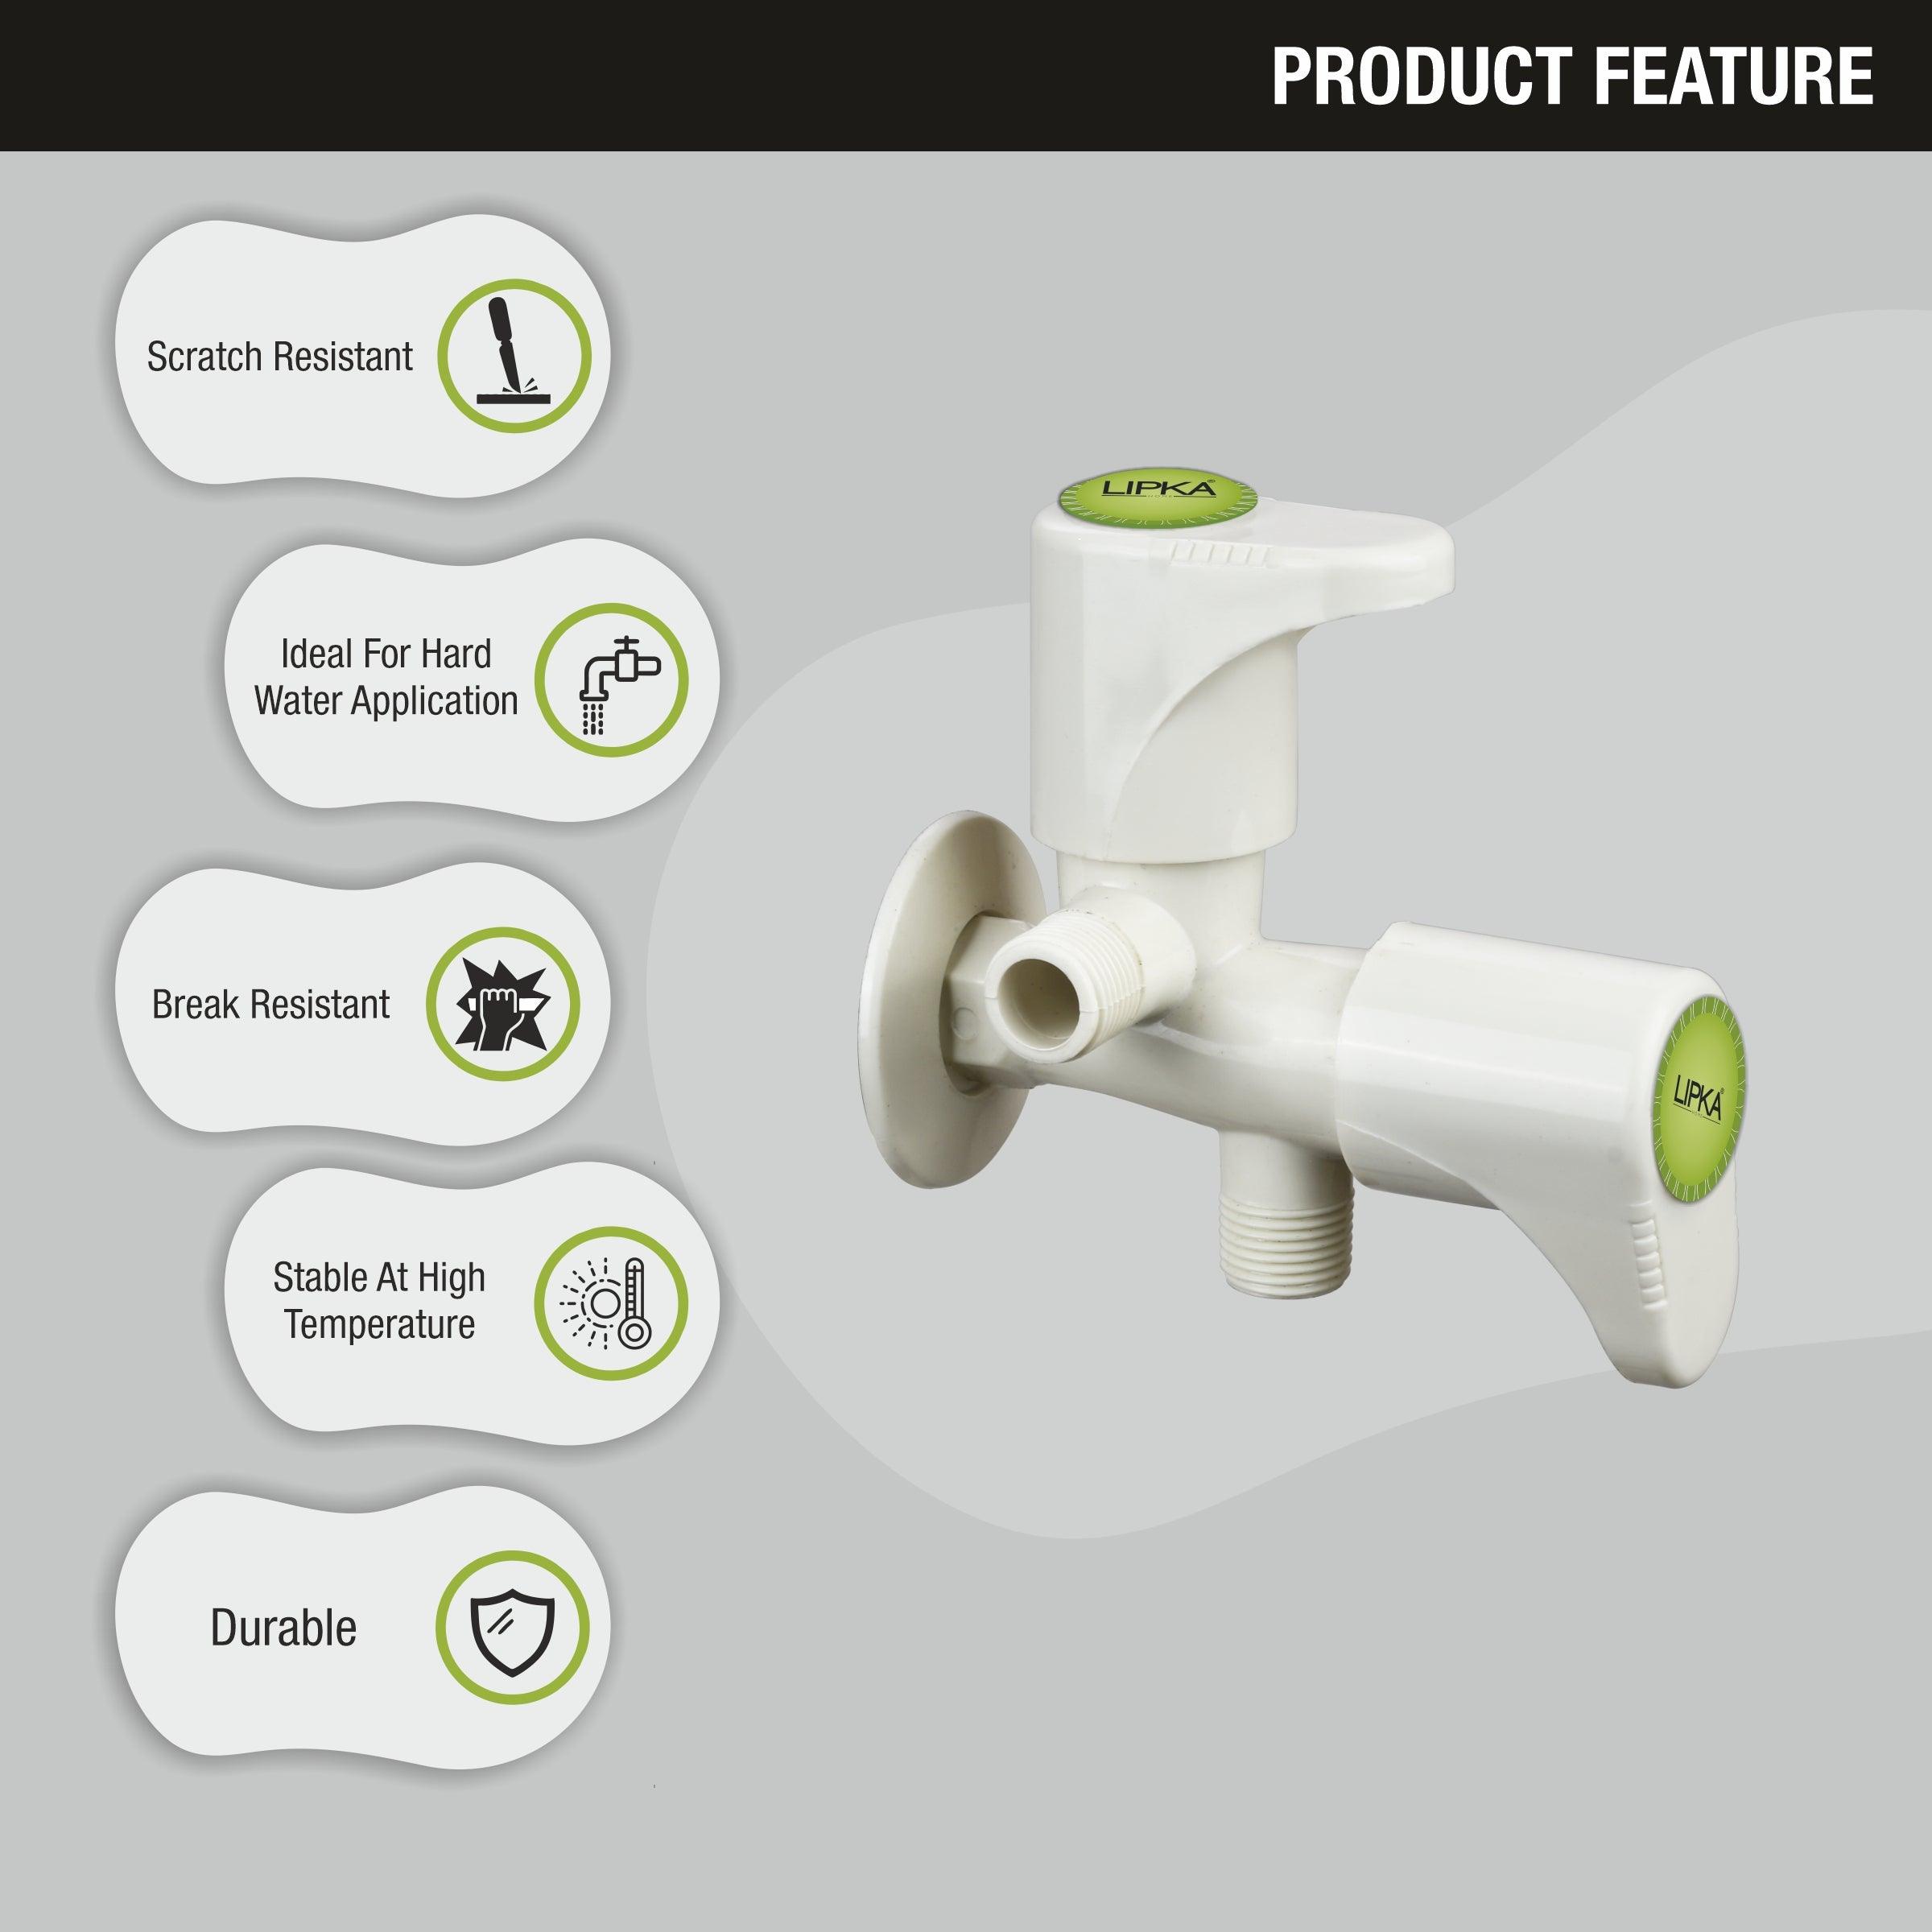 Designo Two Way Angle Valve PTMT Faucet (Double Handle) features